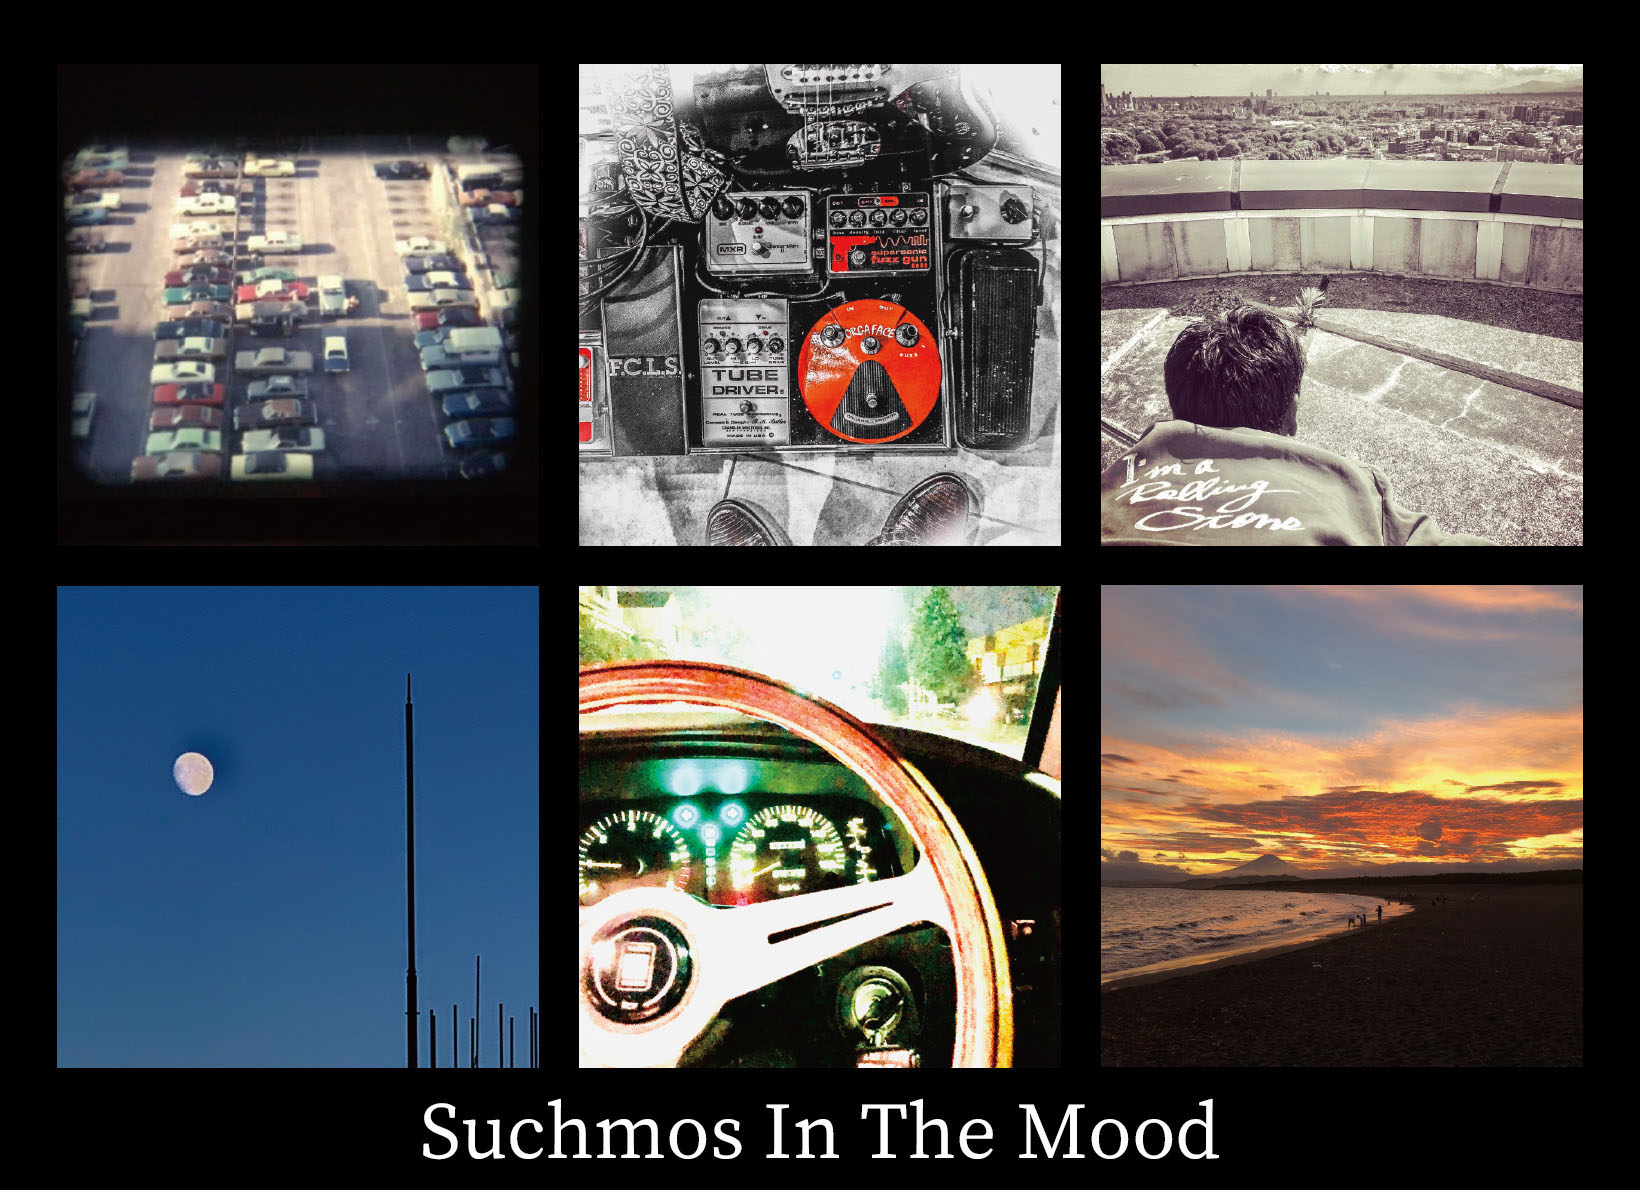 Suchmos 各メンバーが選曲したプレイリスト Suchmos In The Mood 第一弾を公開 Daily News Billboard Japan